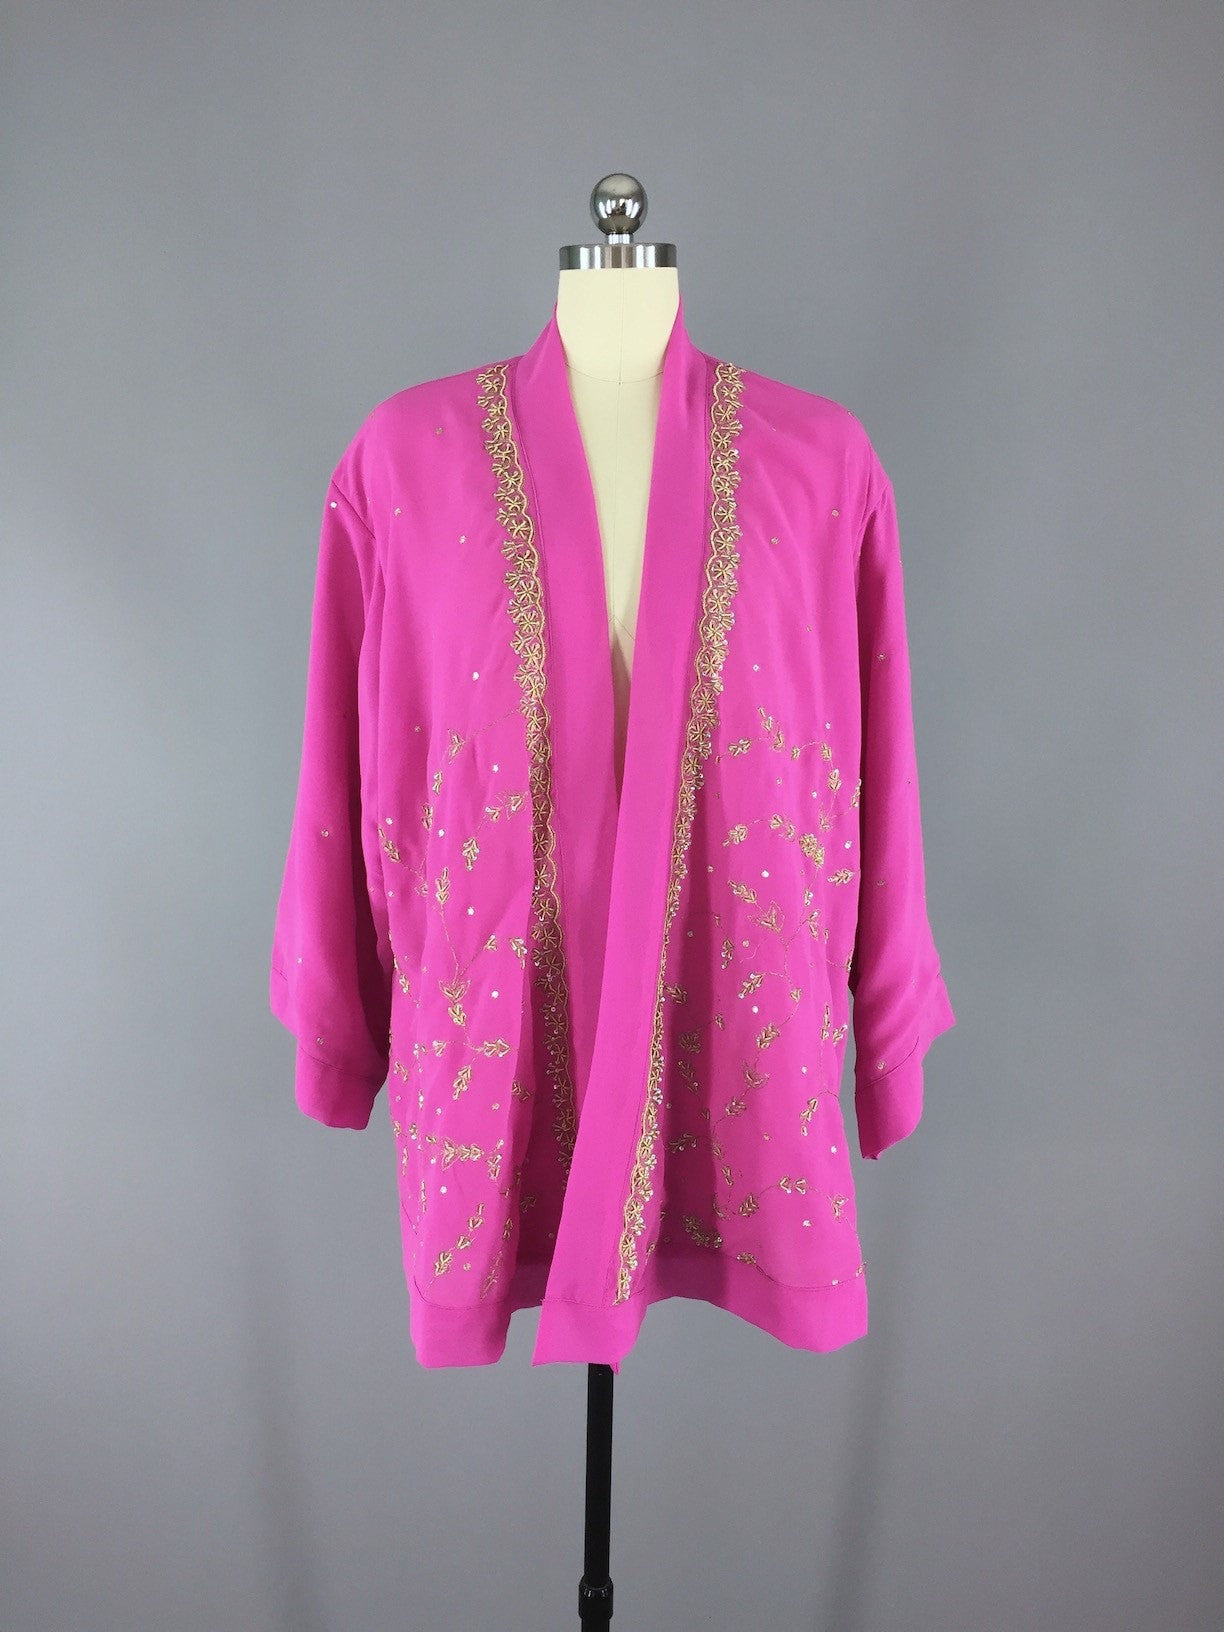 Bright Pink Georgette Kimono Cardigan made from a Vintage Indian Sari - ThisBlueBird